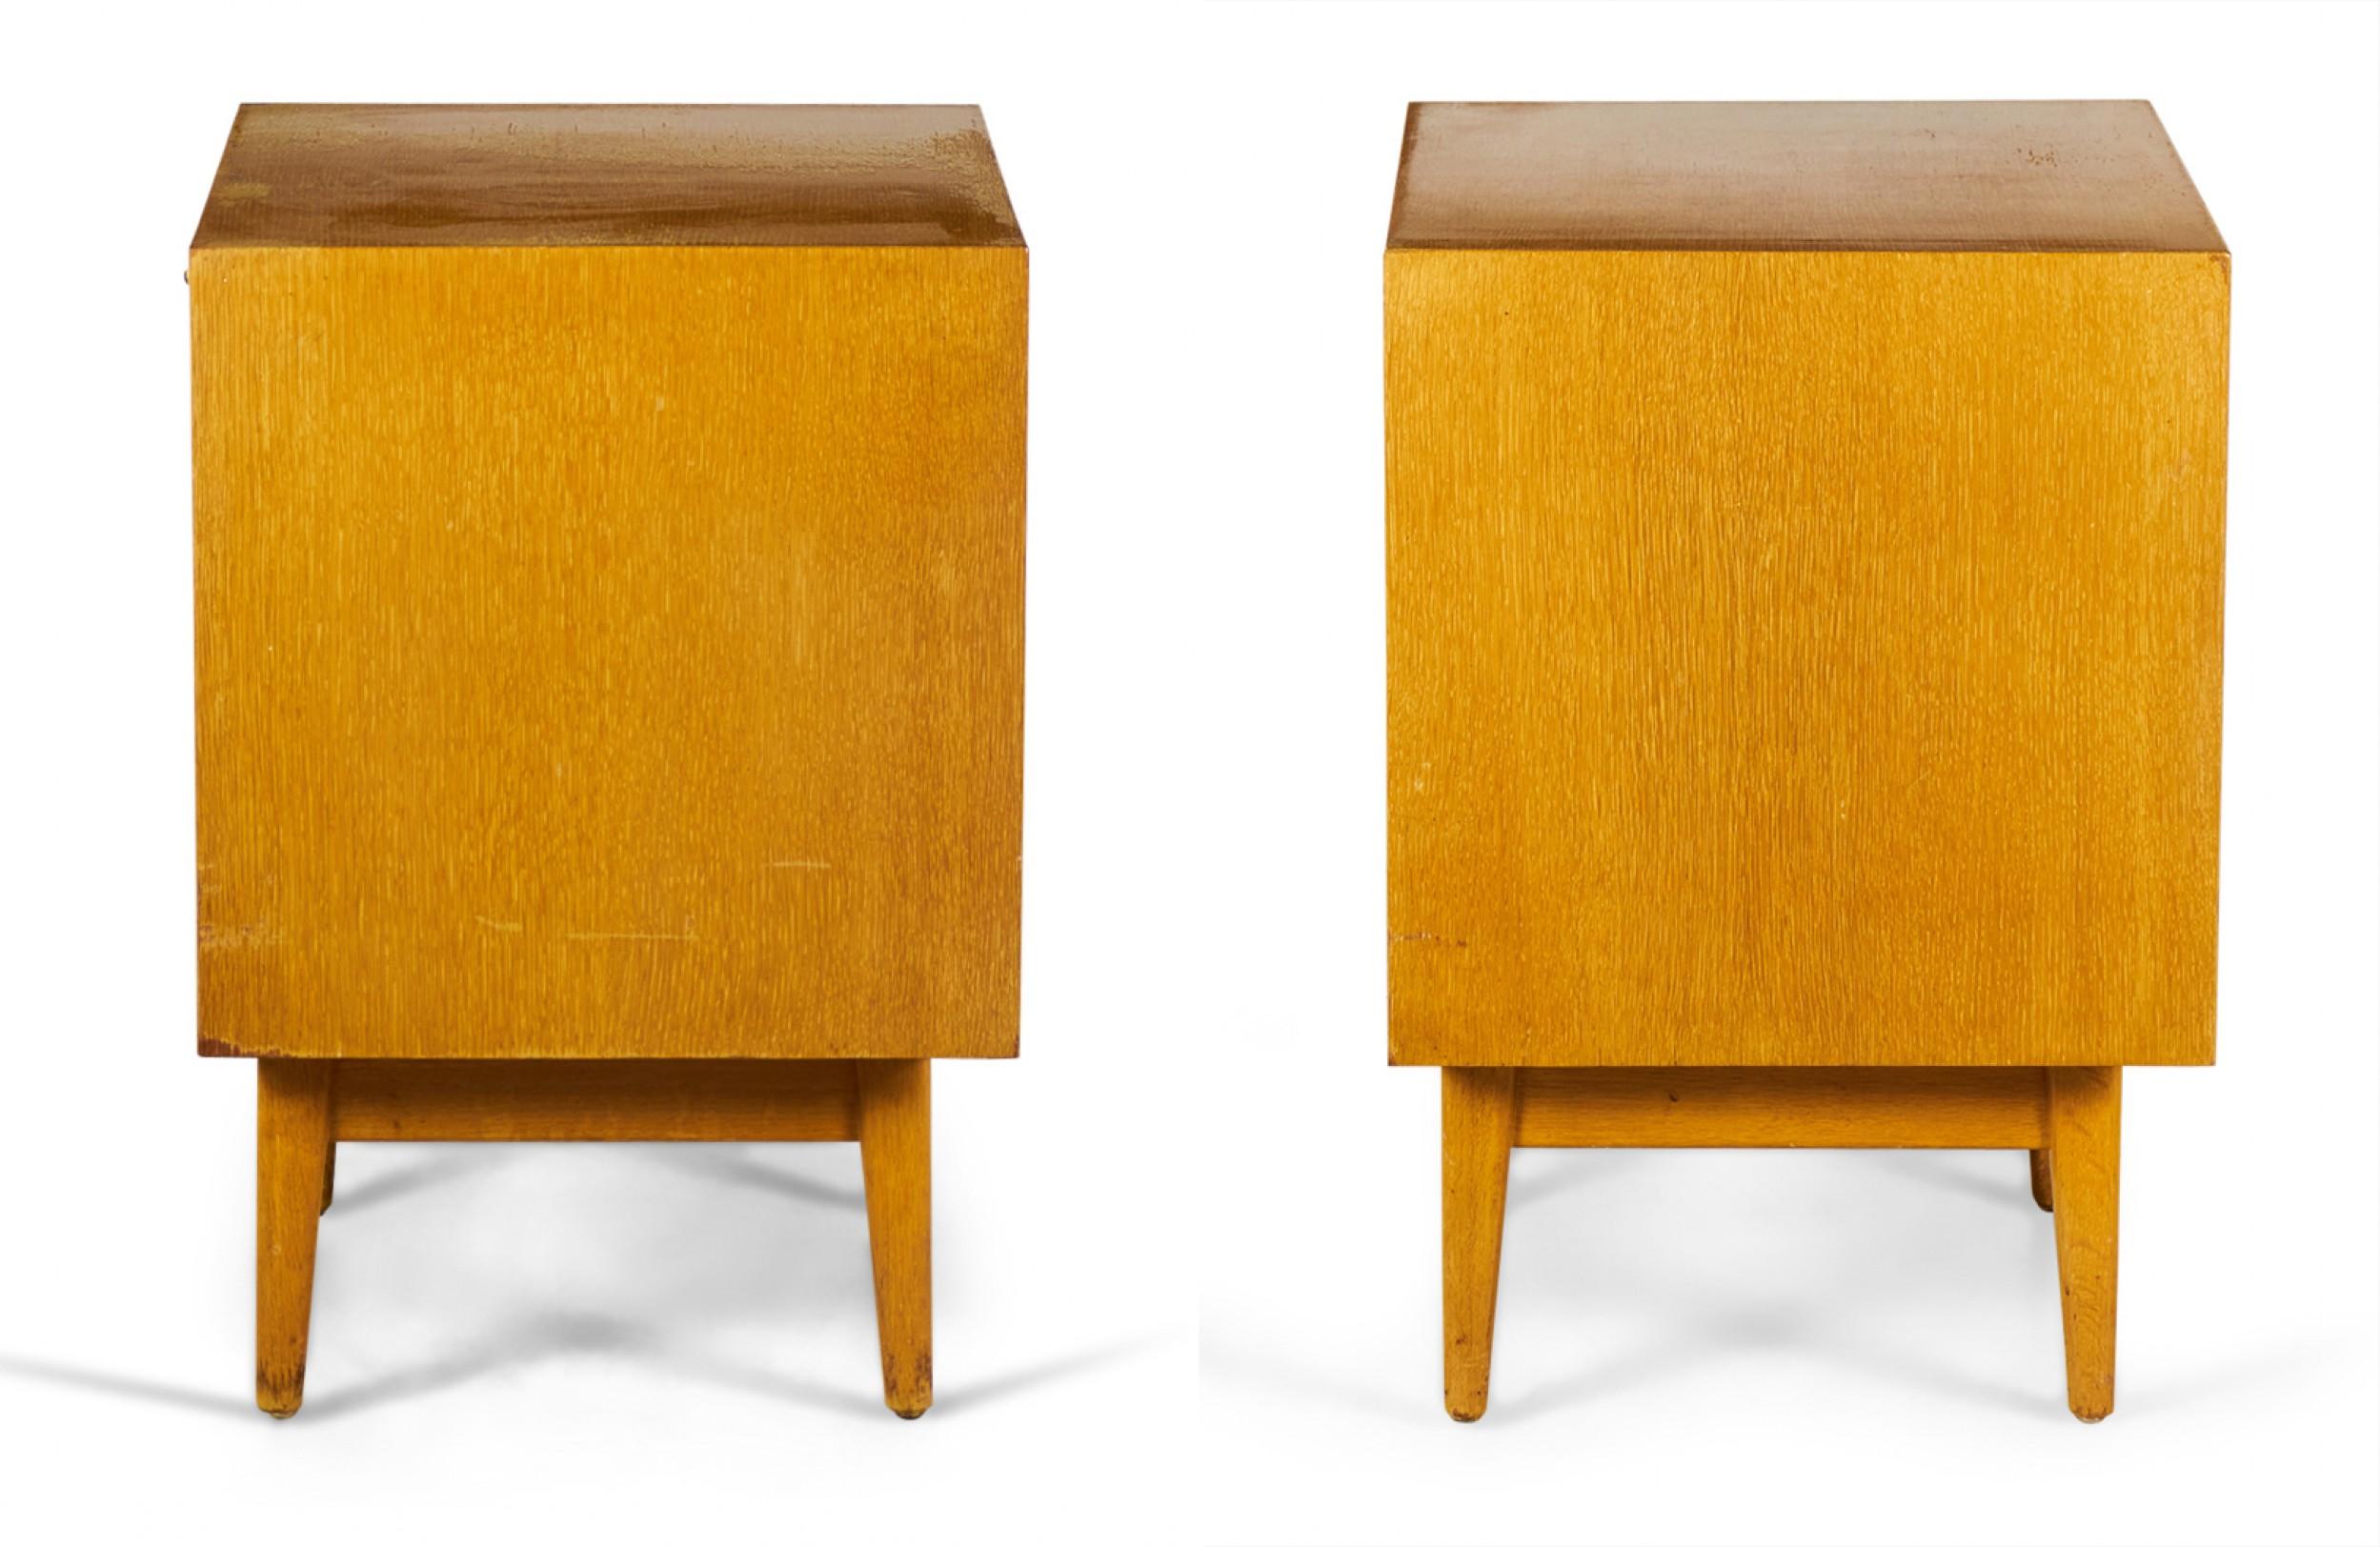 Pair of Jens Risom Danish Mid-Century Blond Oak Bedside Table / Commodes For Sale 2